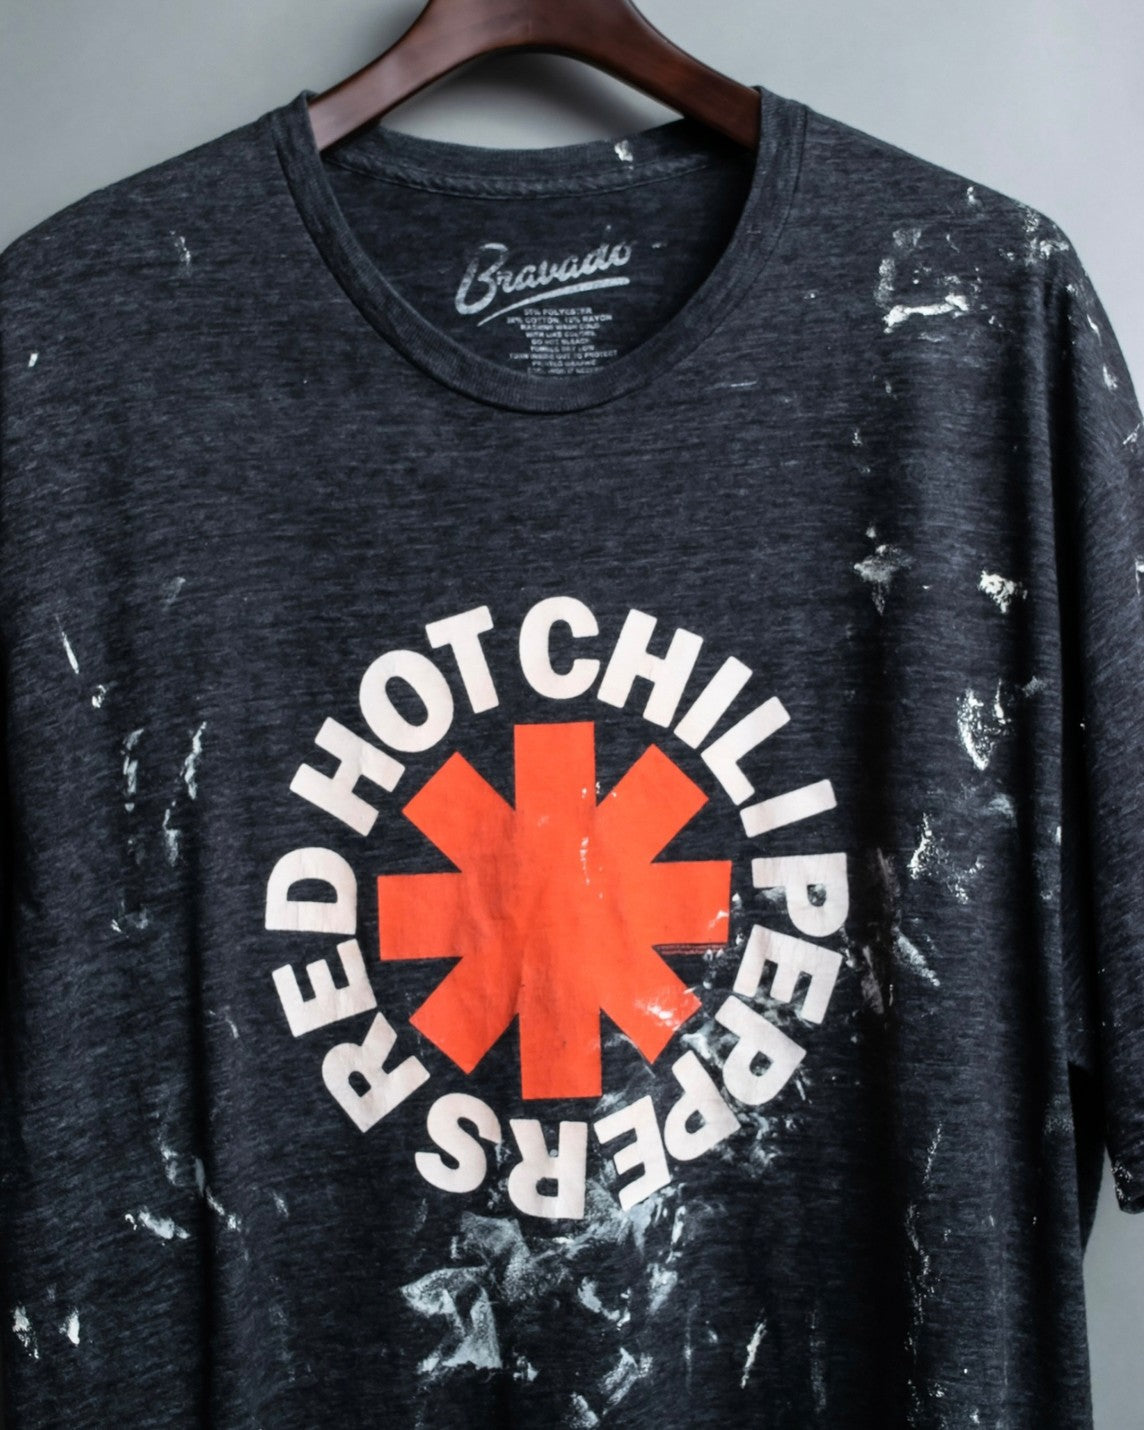 "Red Hot Chili" Peppers Custom Painted T-Shirts